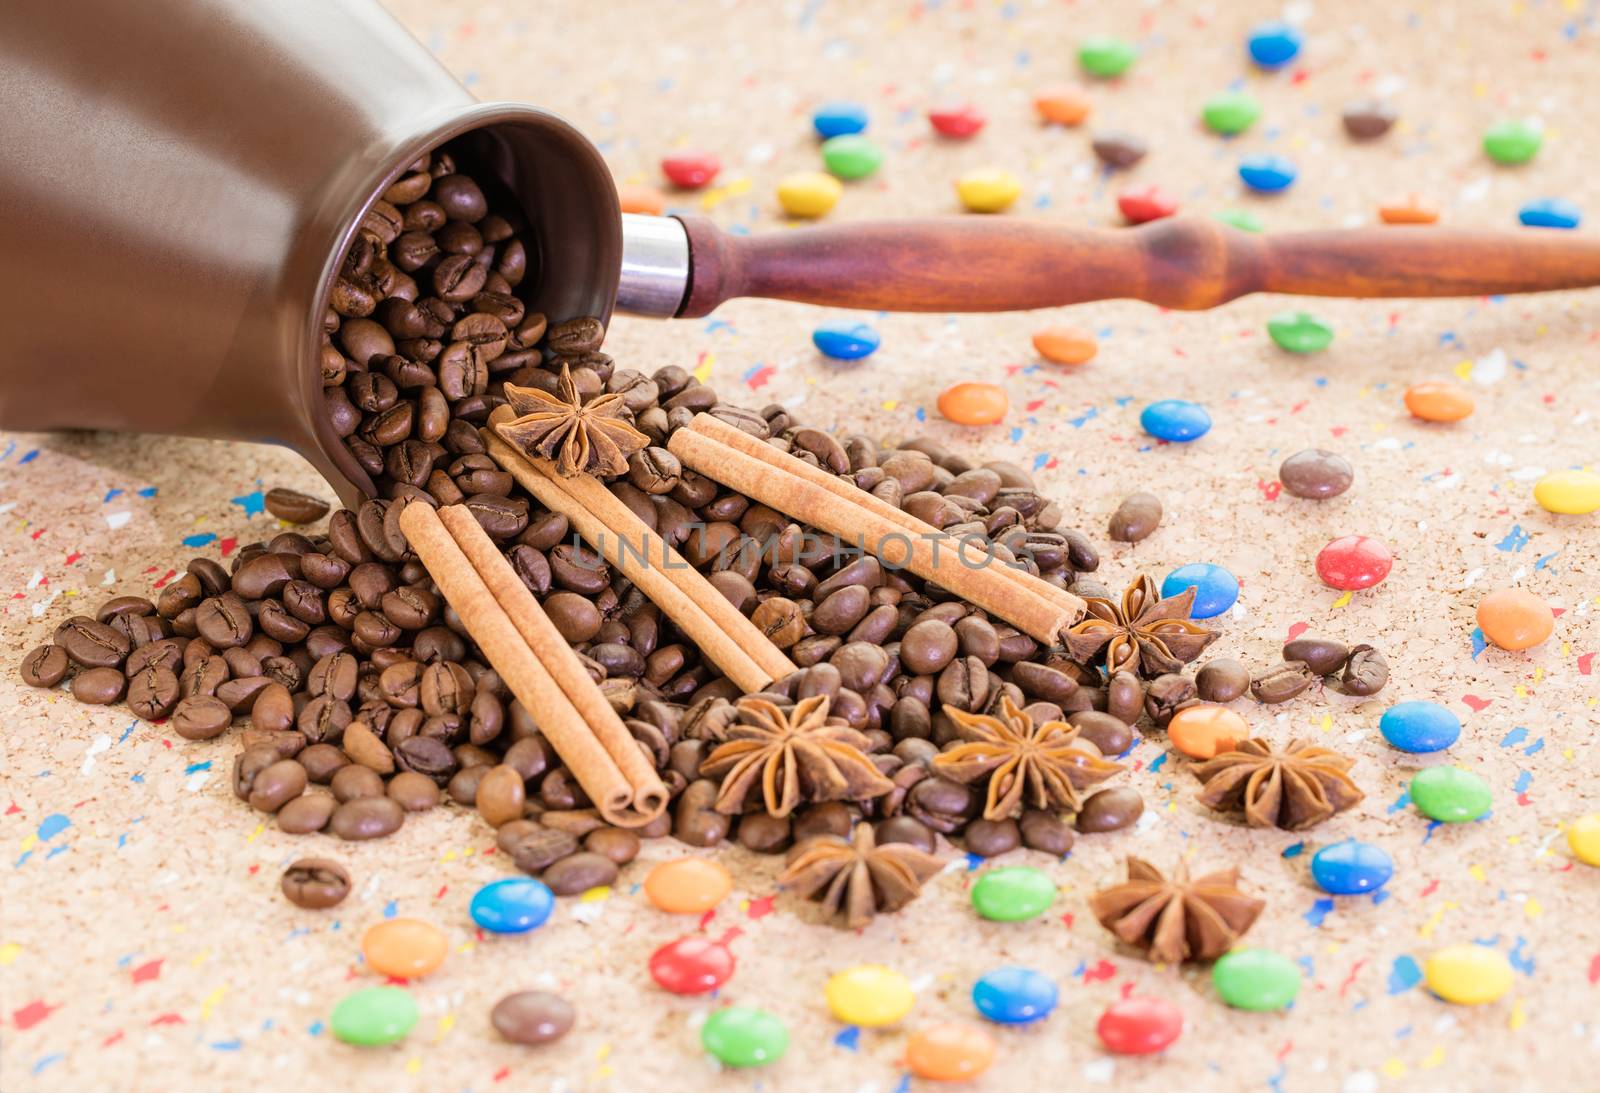 A tumbled clay jezva jar filled with coffee beans, anise and cinnamon sticks with colorful candies